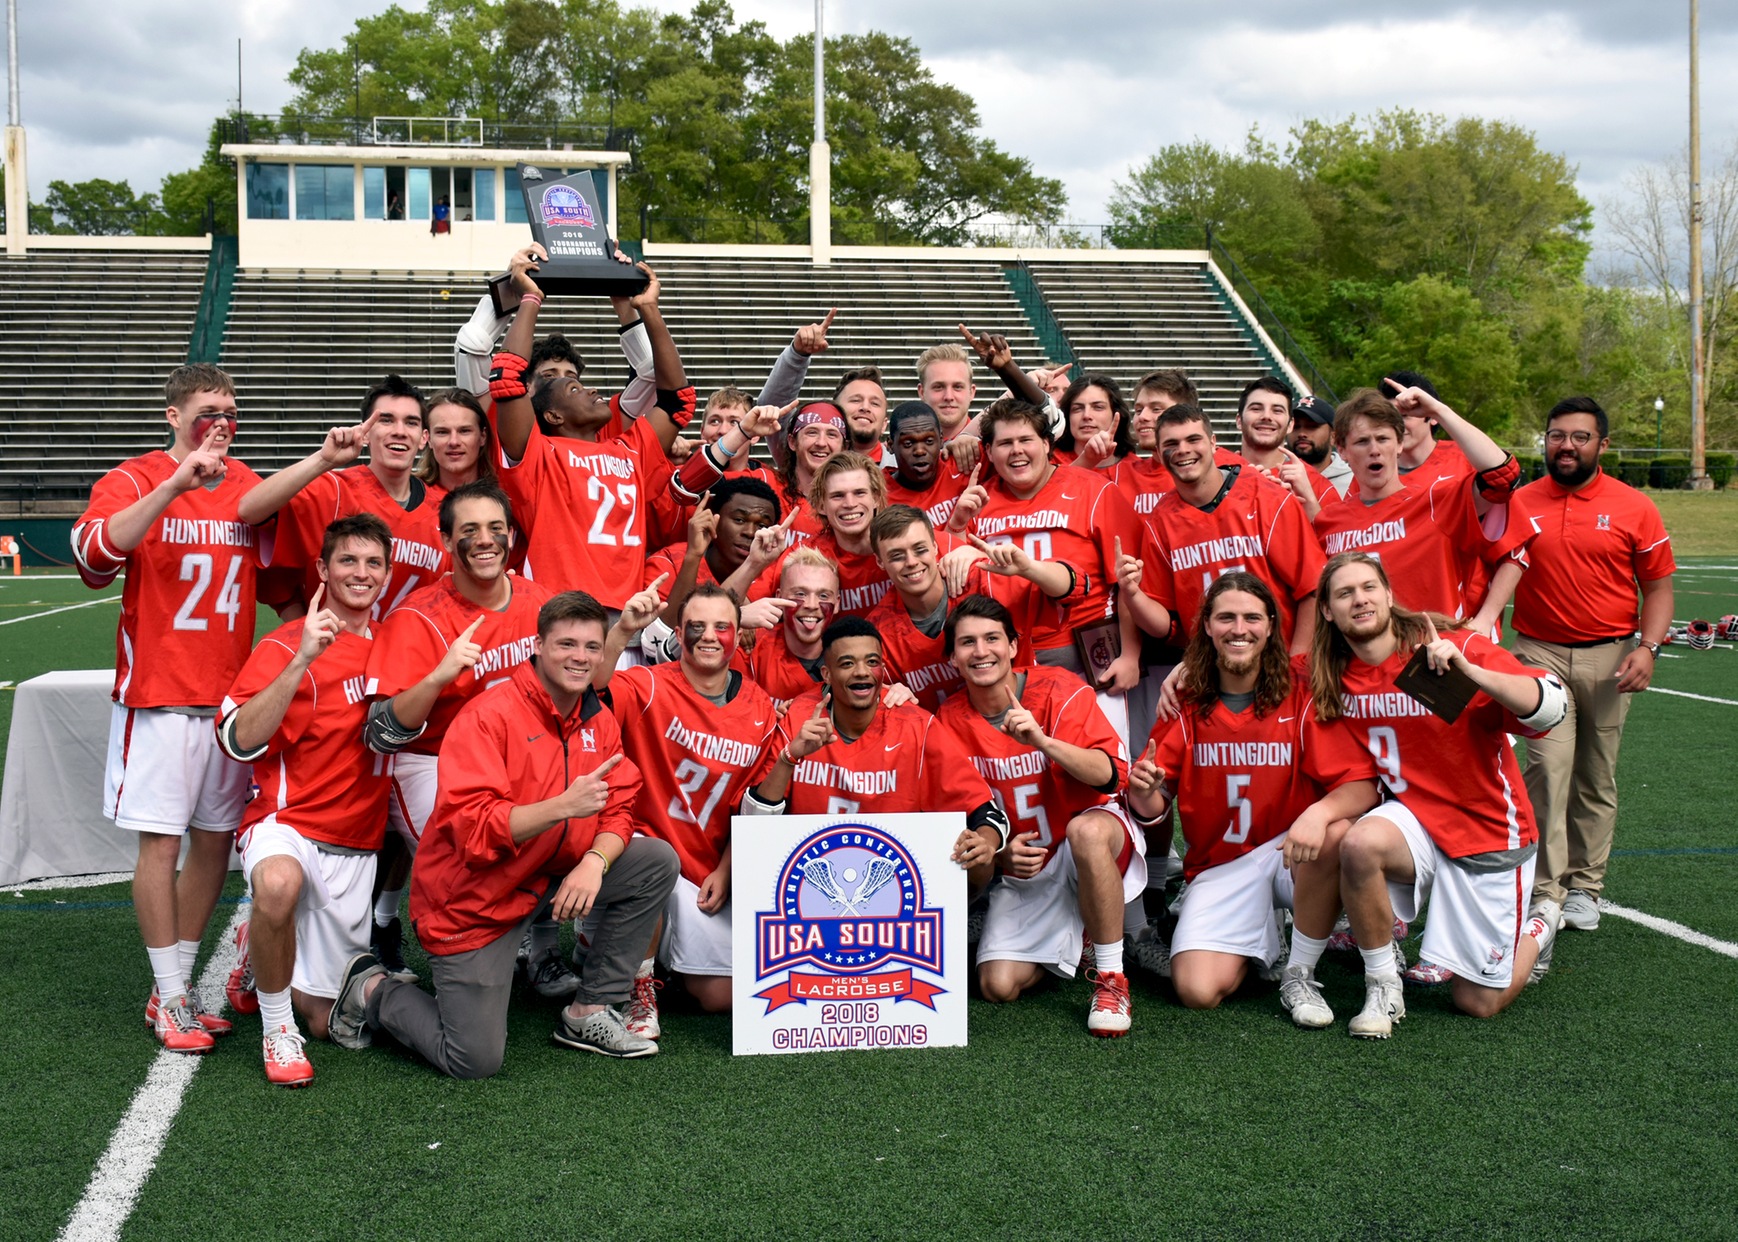 Huntingdon defeated Methodist 12-4 to win the inaugural USA South men's lacrosse conference championship. (Photo submitted)